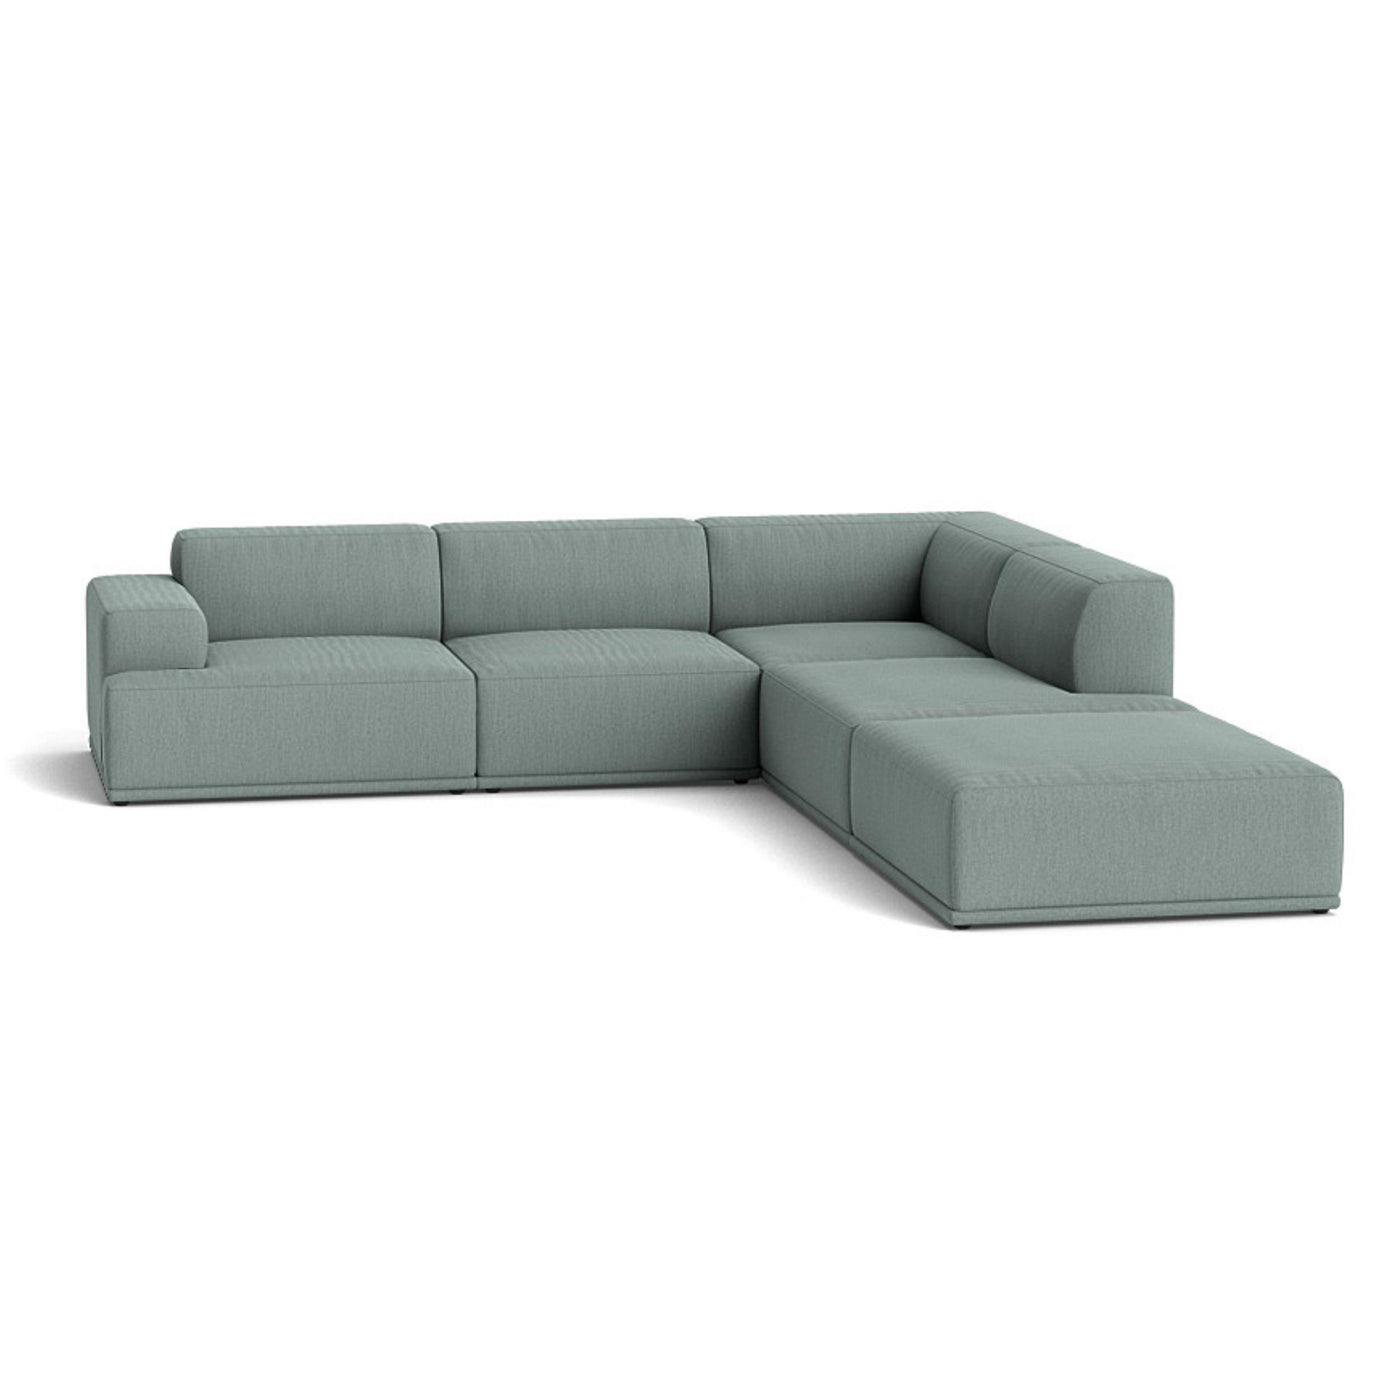 Muuto Connect Soft Modular Corner Sofa, configuration 2. Made-to-order from someday designs. #colour_re-wool-828